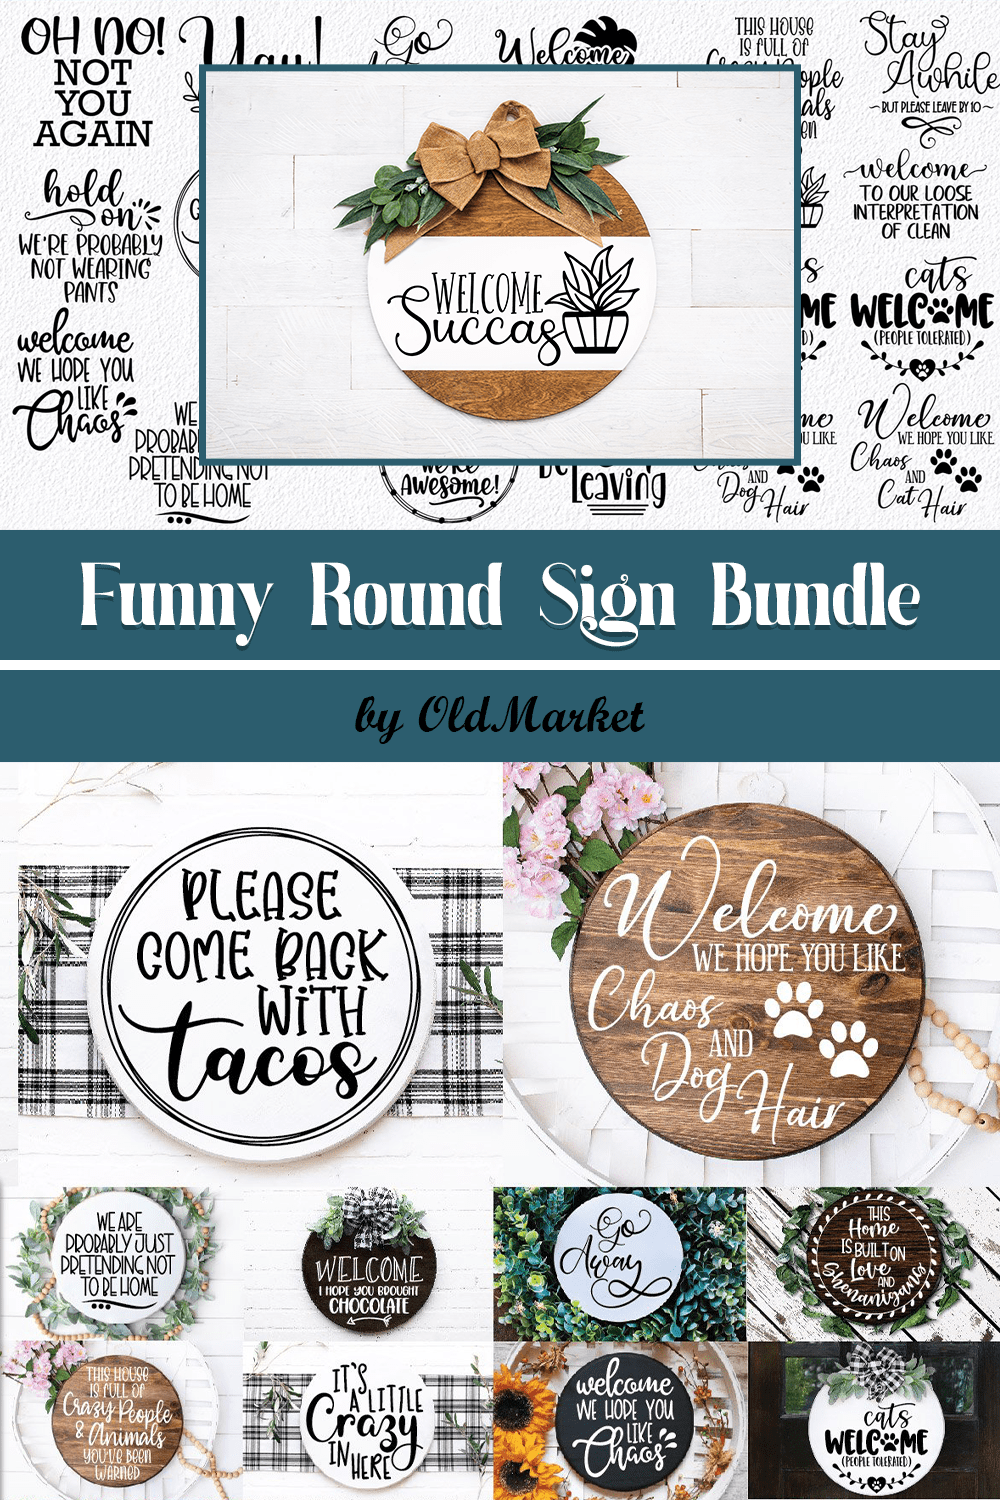 Funny Round Sign Bundle - pinterest image preview.